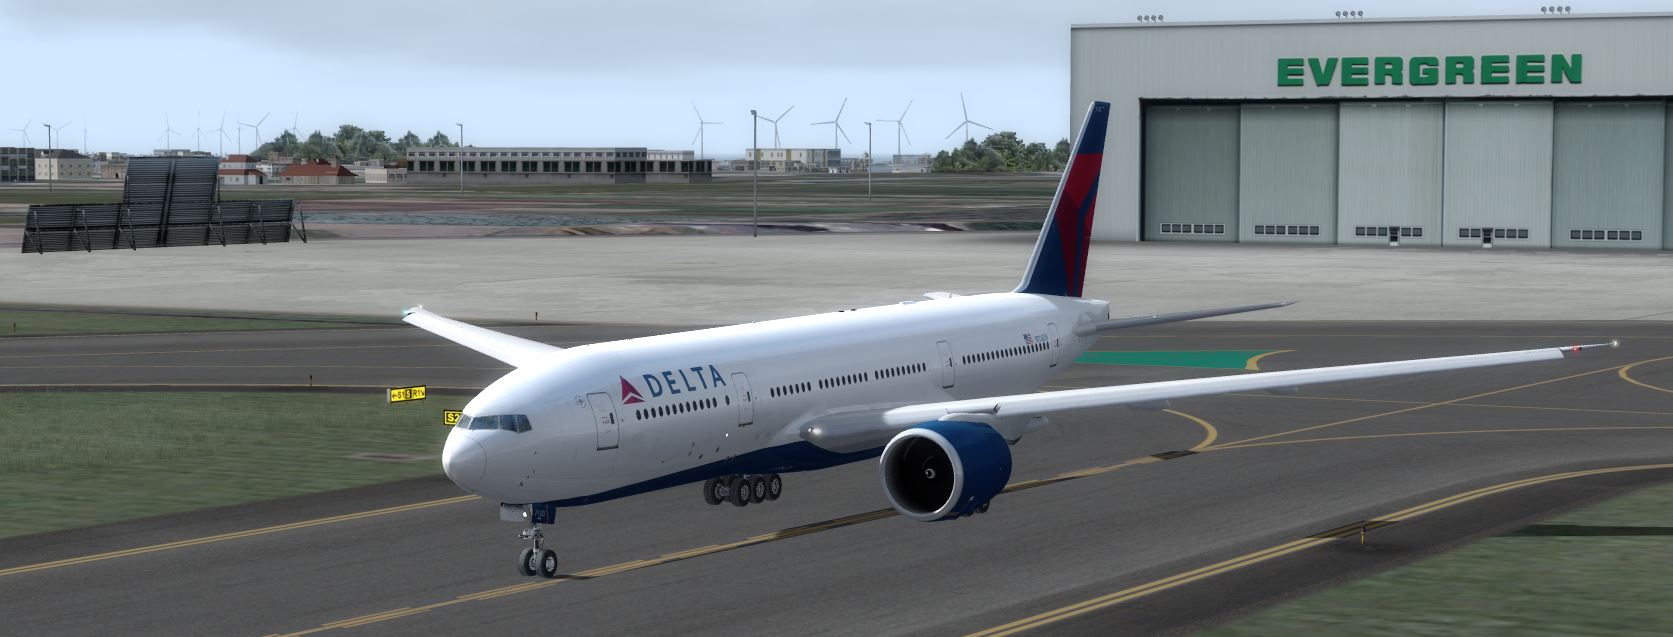 B777-200 Delta Airlines Standard Livery-5310 